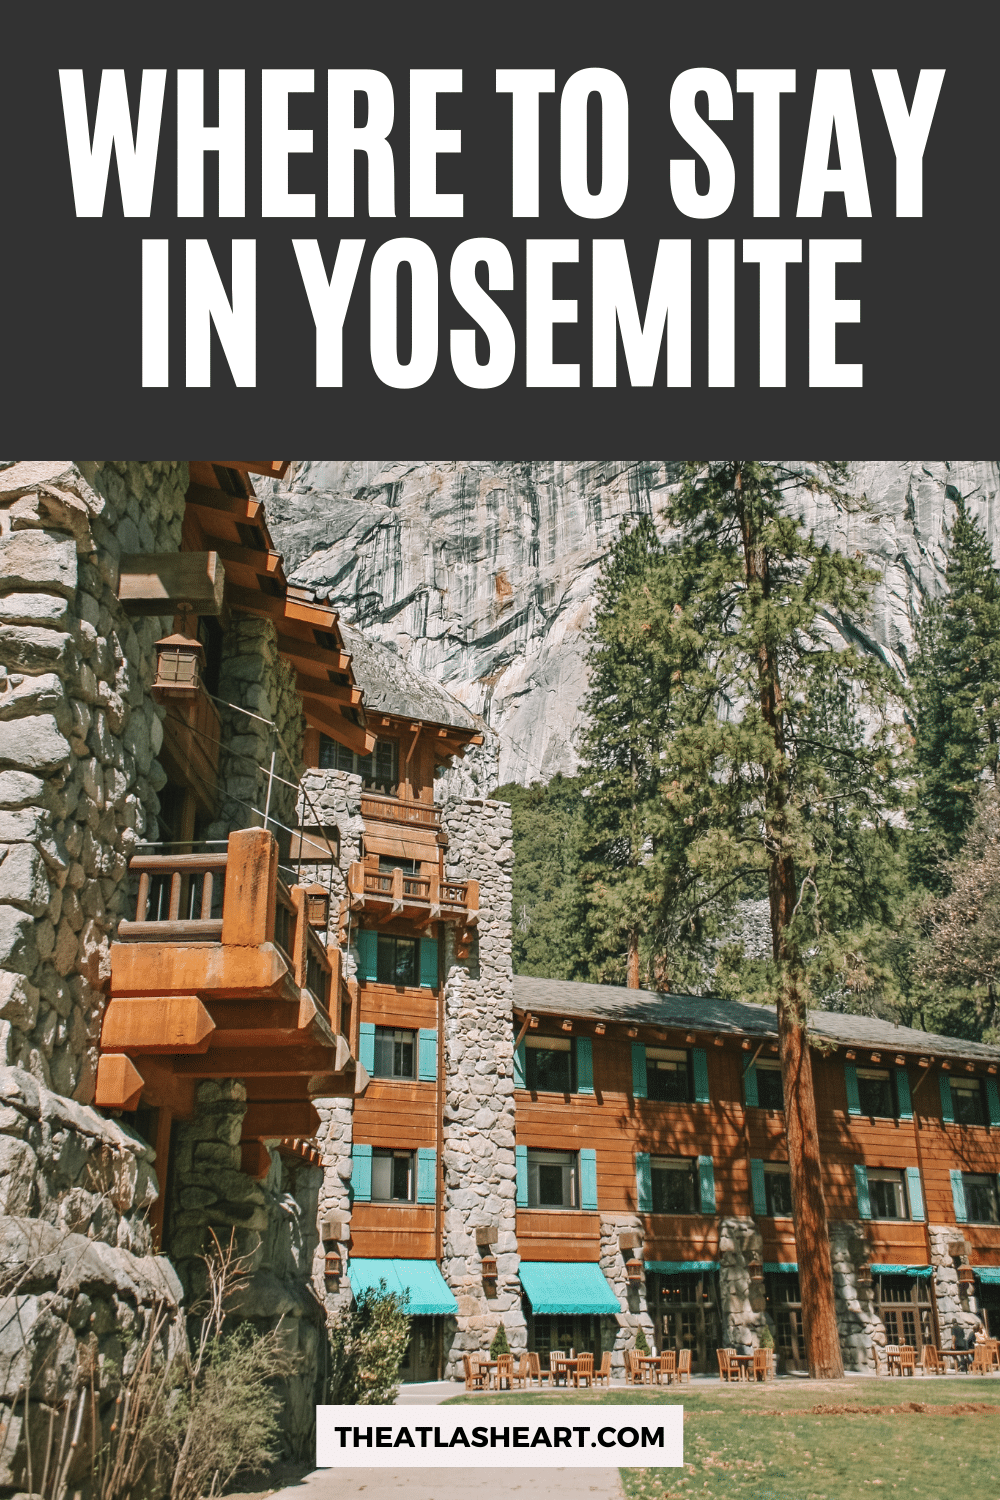 Where to Stay in Yosemite National Park in 2022 (Inside & Outside)